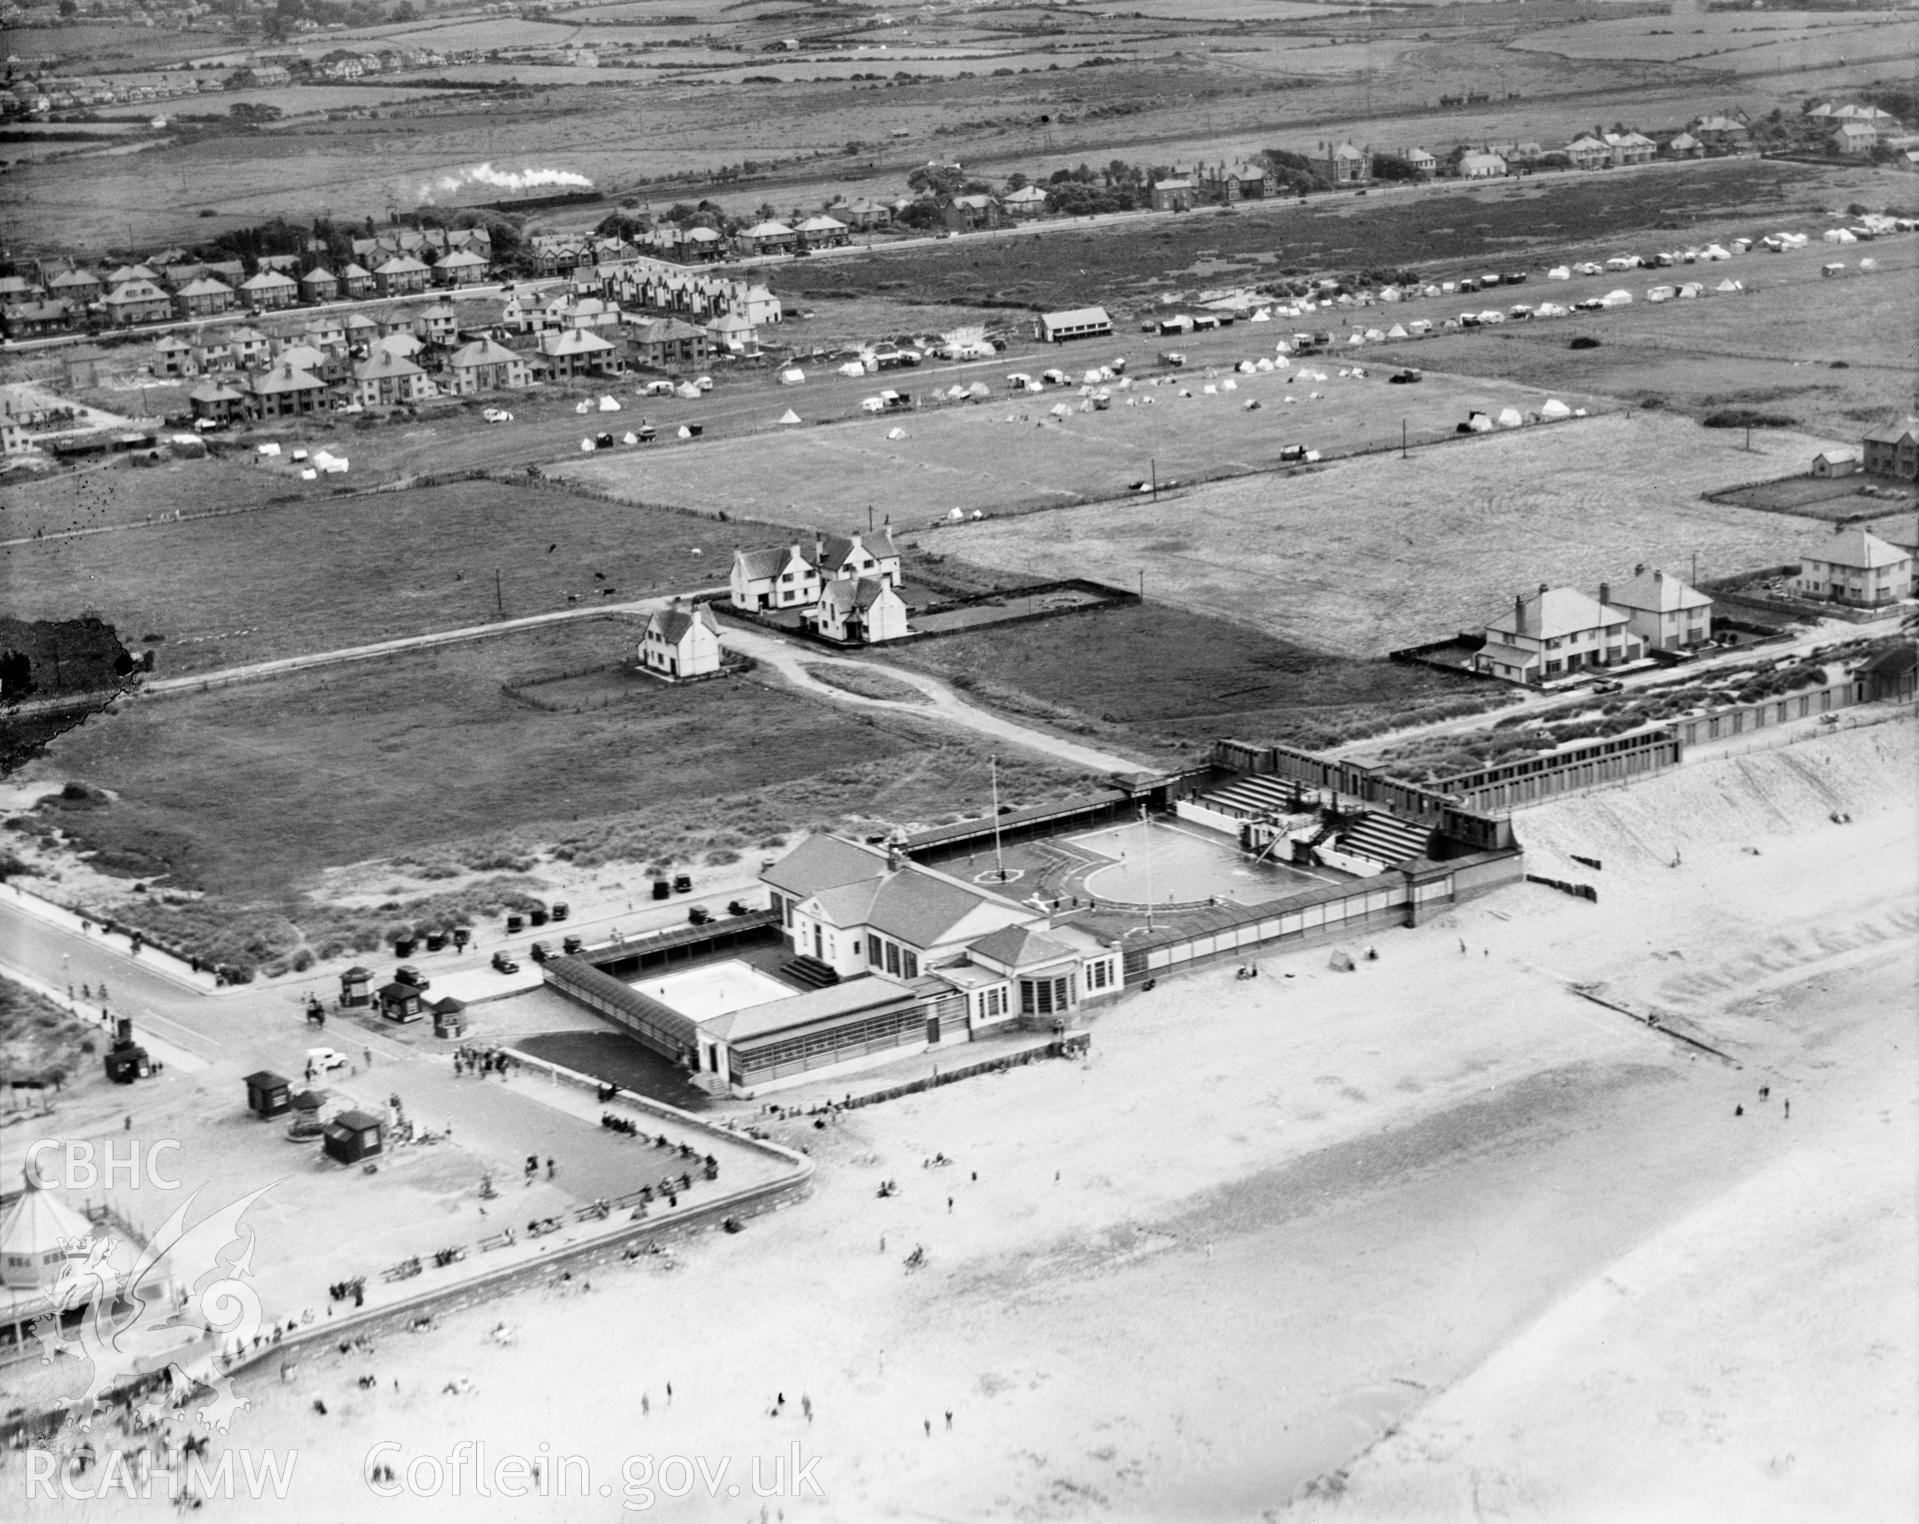 View of Prestatyn showing the newly built Lido, oblique aerial view. 5?x4? black and white glass plate negative.